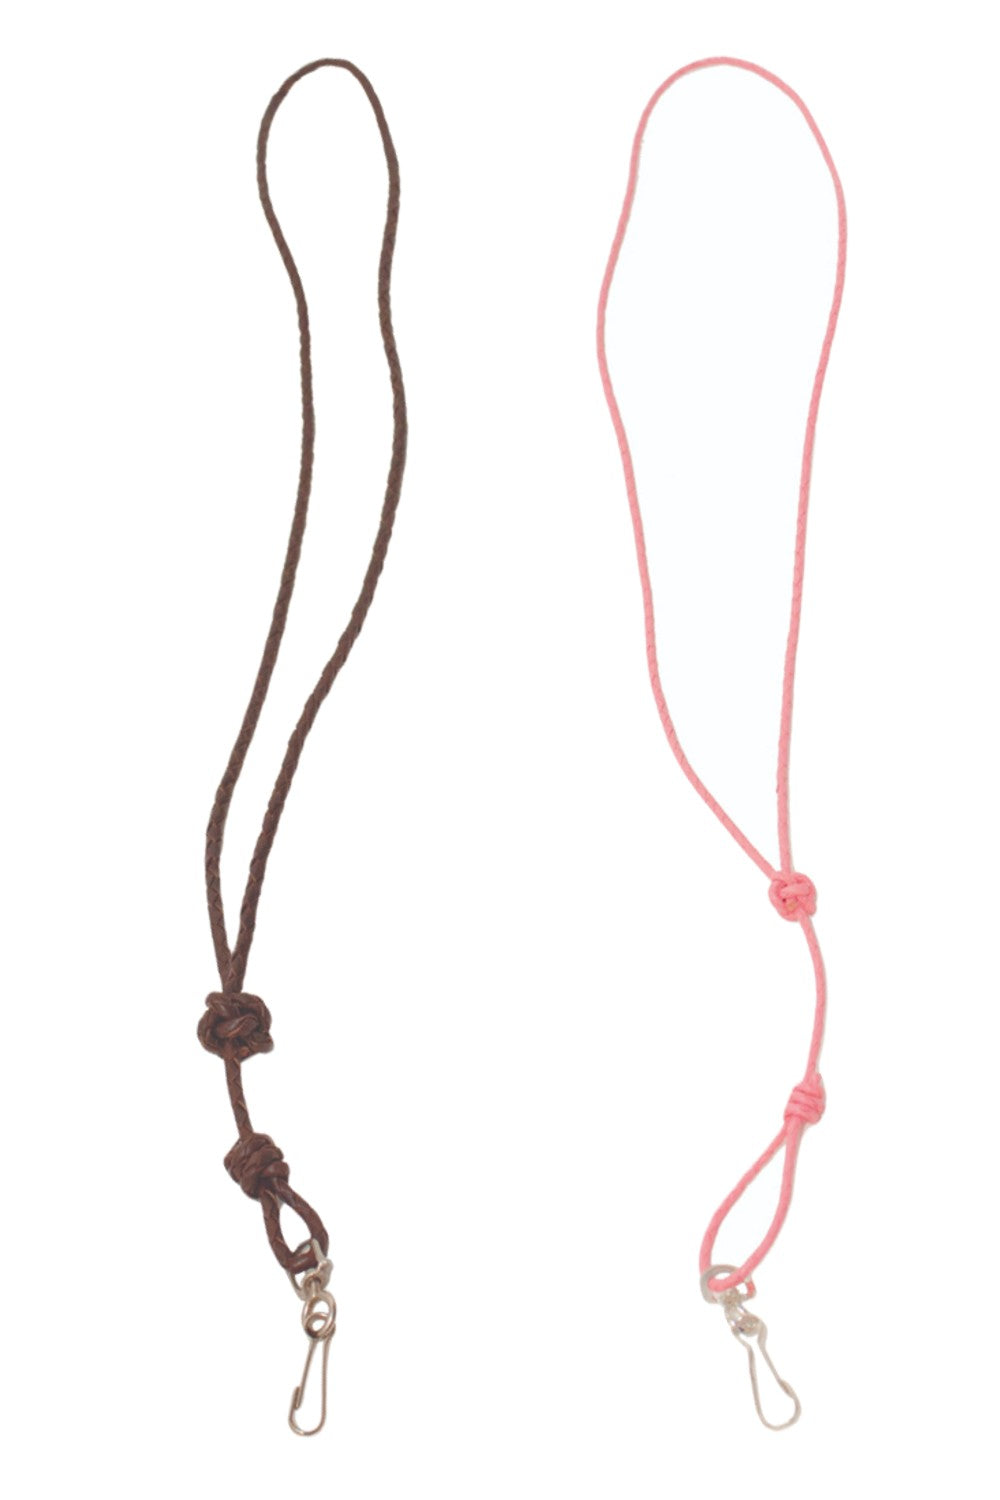 Bisley Plaited Leather Lanyard In Brown and Pink